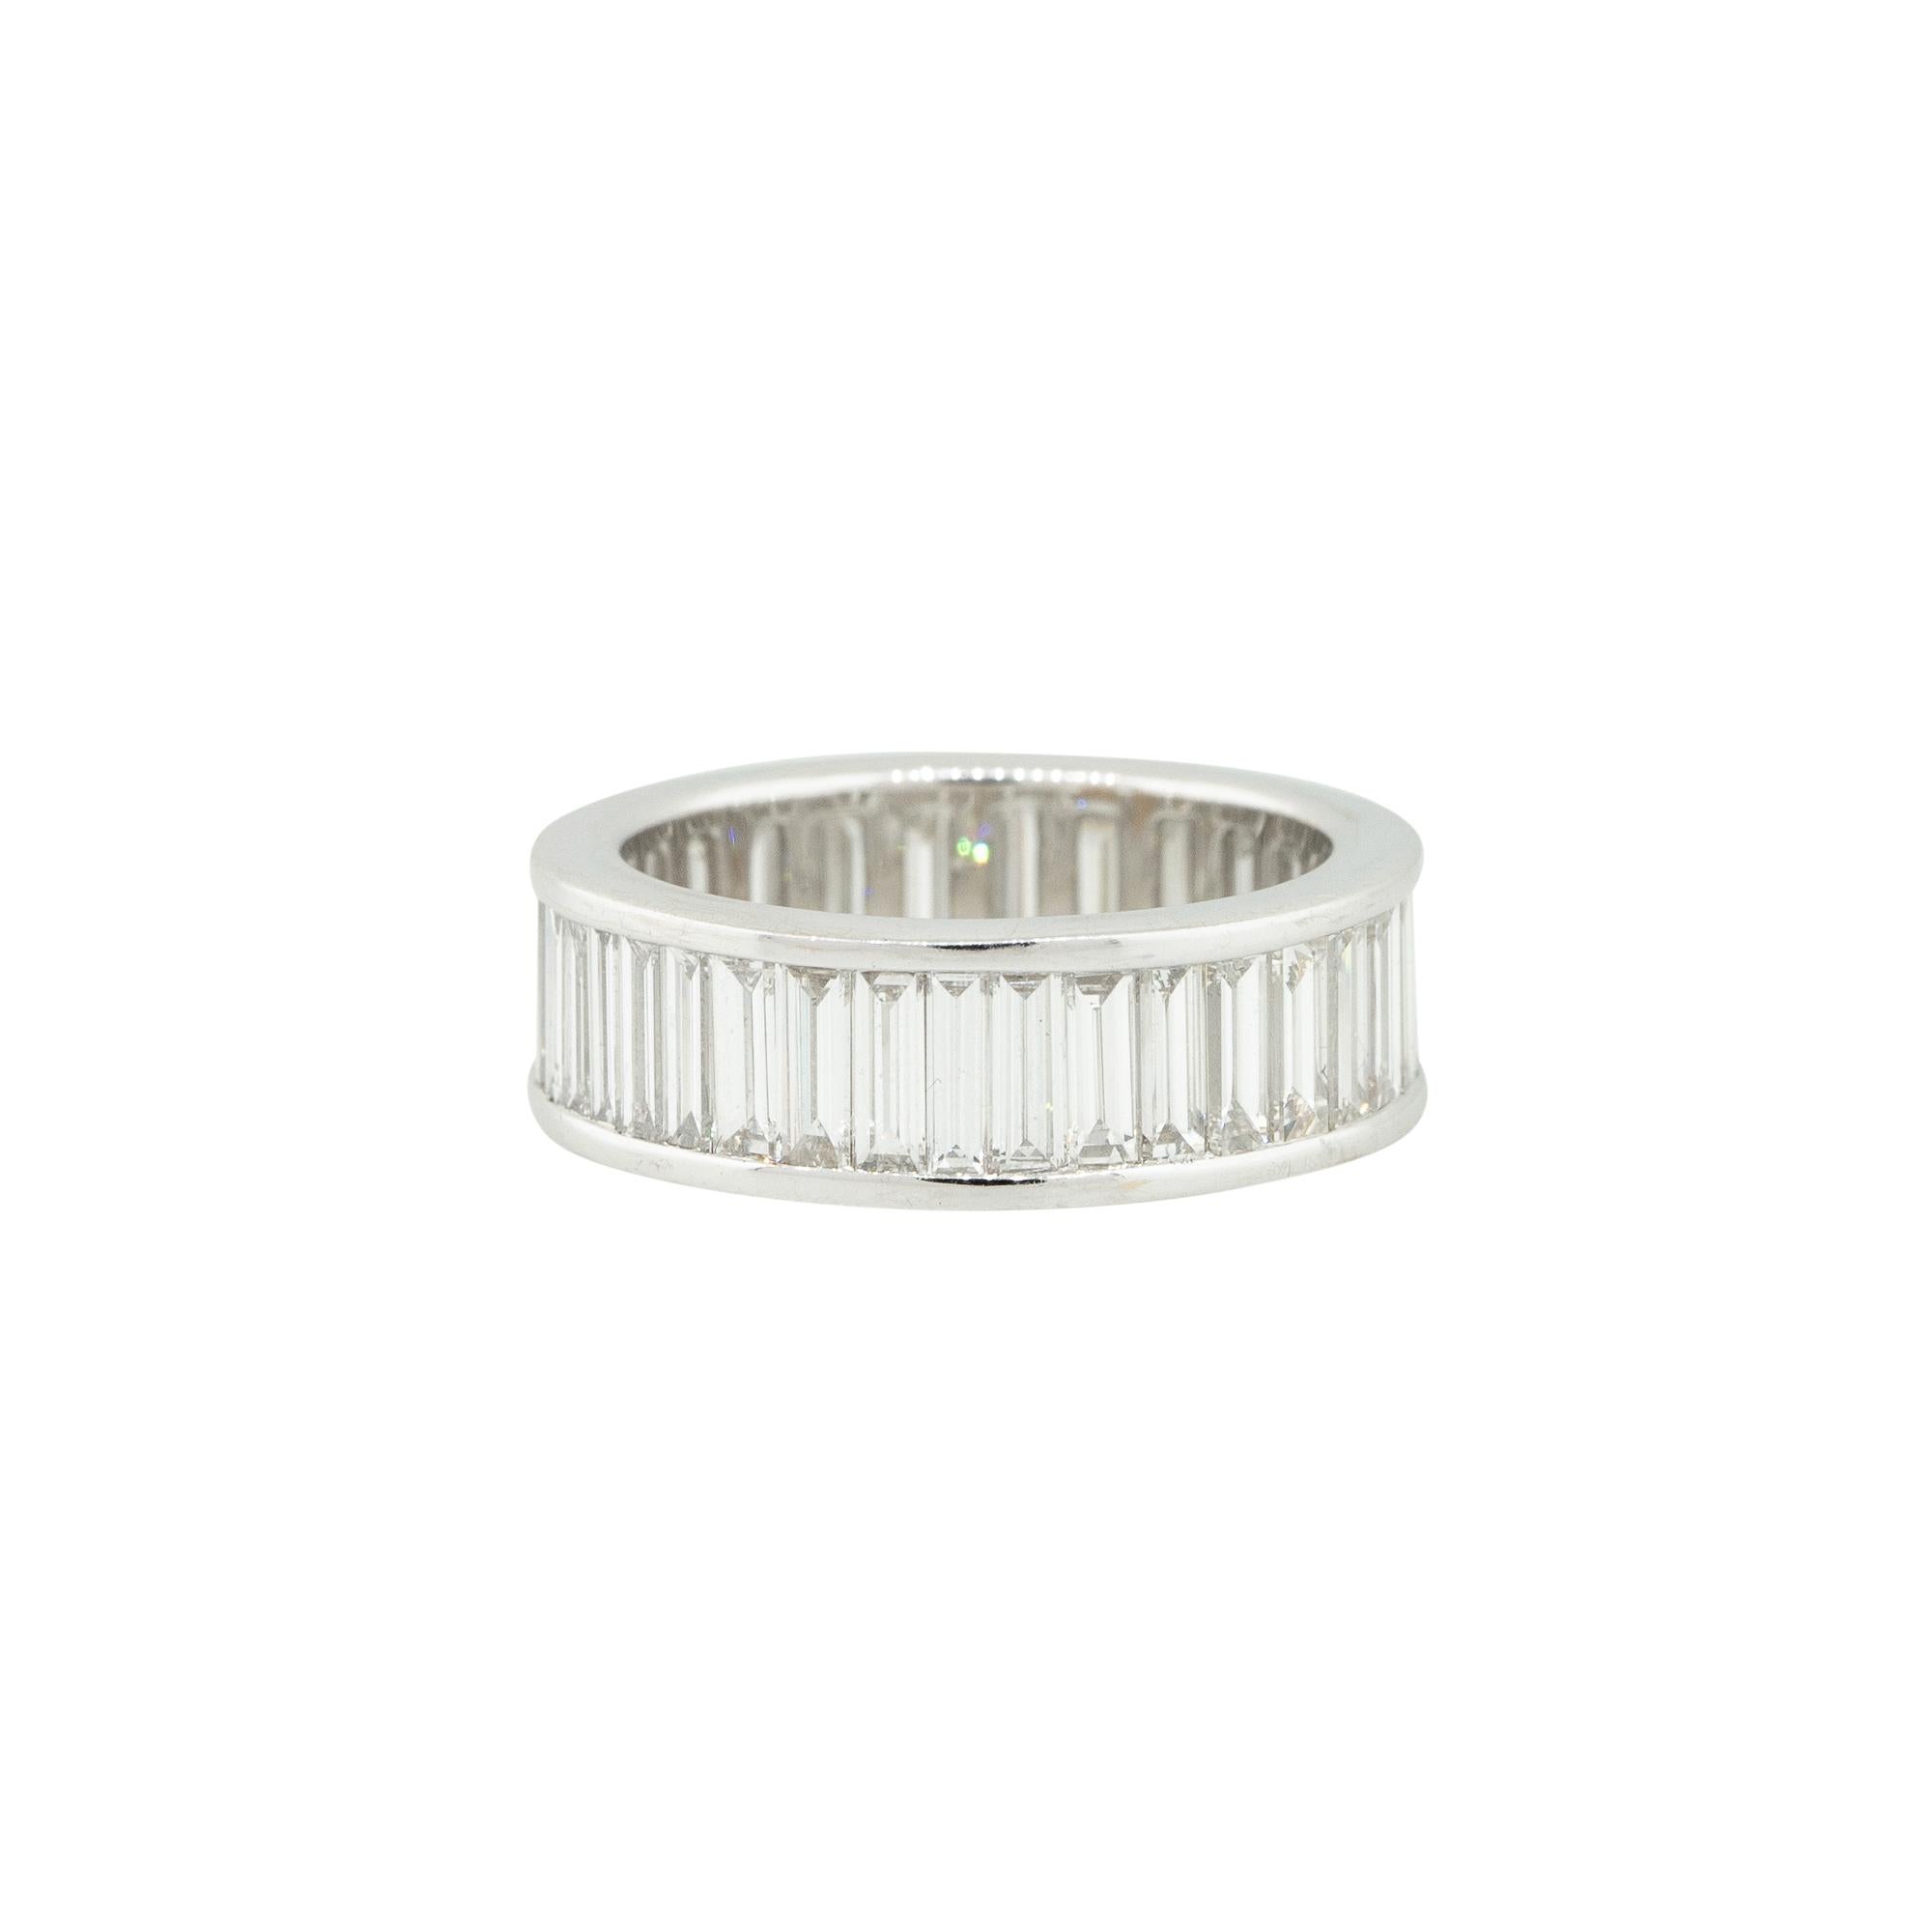 18k White Gold 3.93ctw Baguette Cut Diamond Eternity Band
Style: Women's Baguette Cut Diamond Eternity Band
Material: 18k White Gold
Main Diamond Details: Approximately 3.93ctw of Baguette Cut Diamonds. There are 38 stones total. Diamonds are